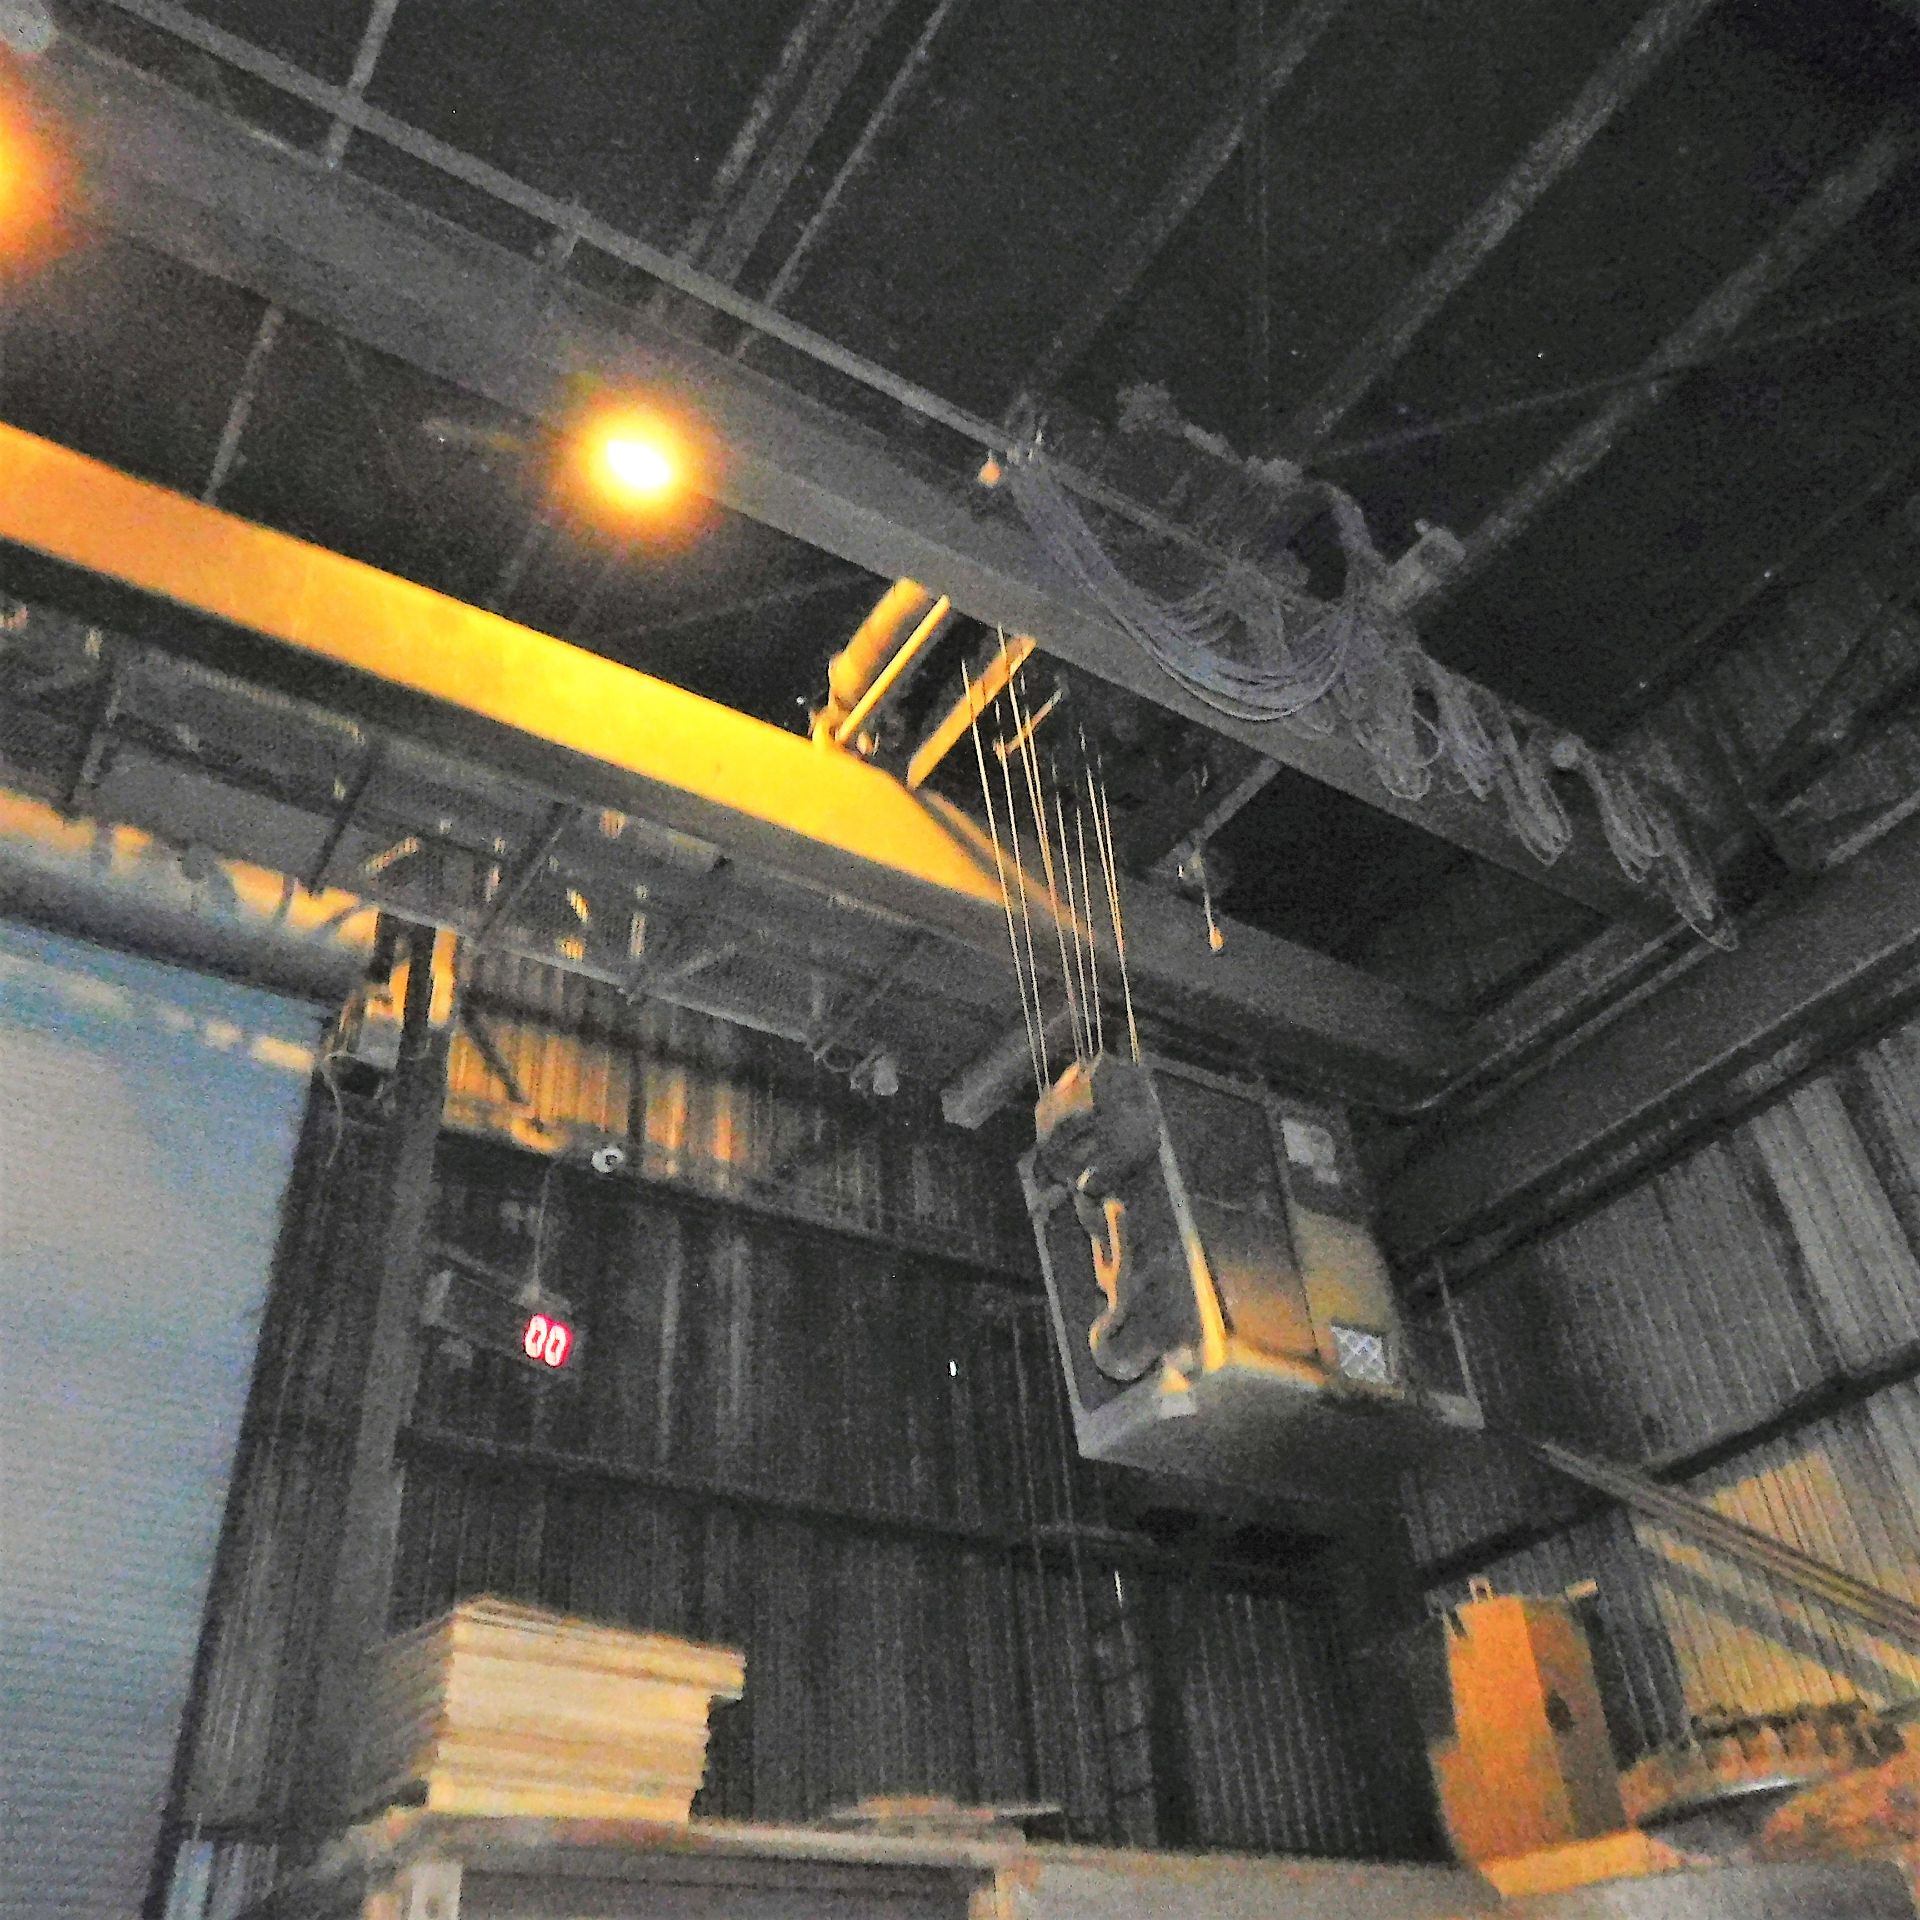 15-TON CAB CRANE, A/C POWERED, W/ SCALE, TOP RUNNING BOX GIRDER, 45' SPAN (LATE REMOVAL - JULY 16) - Image 3 of 6